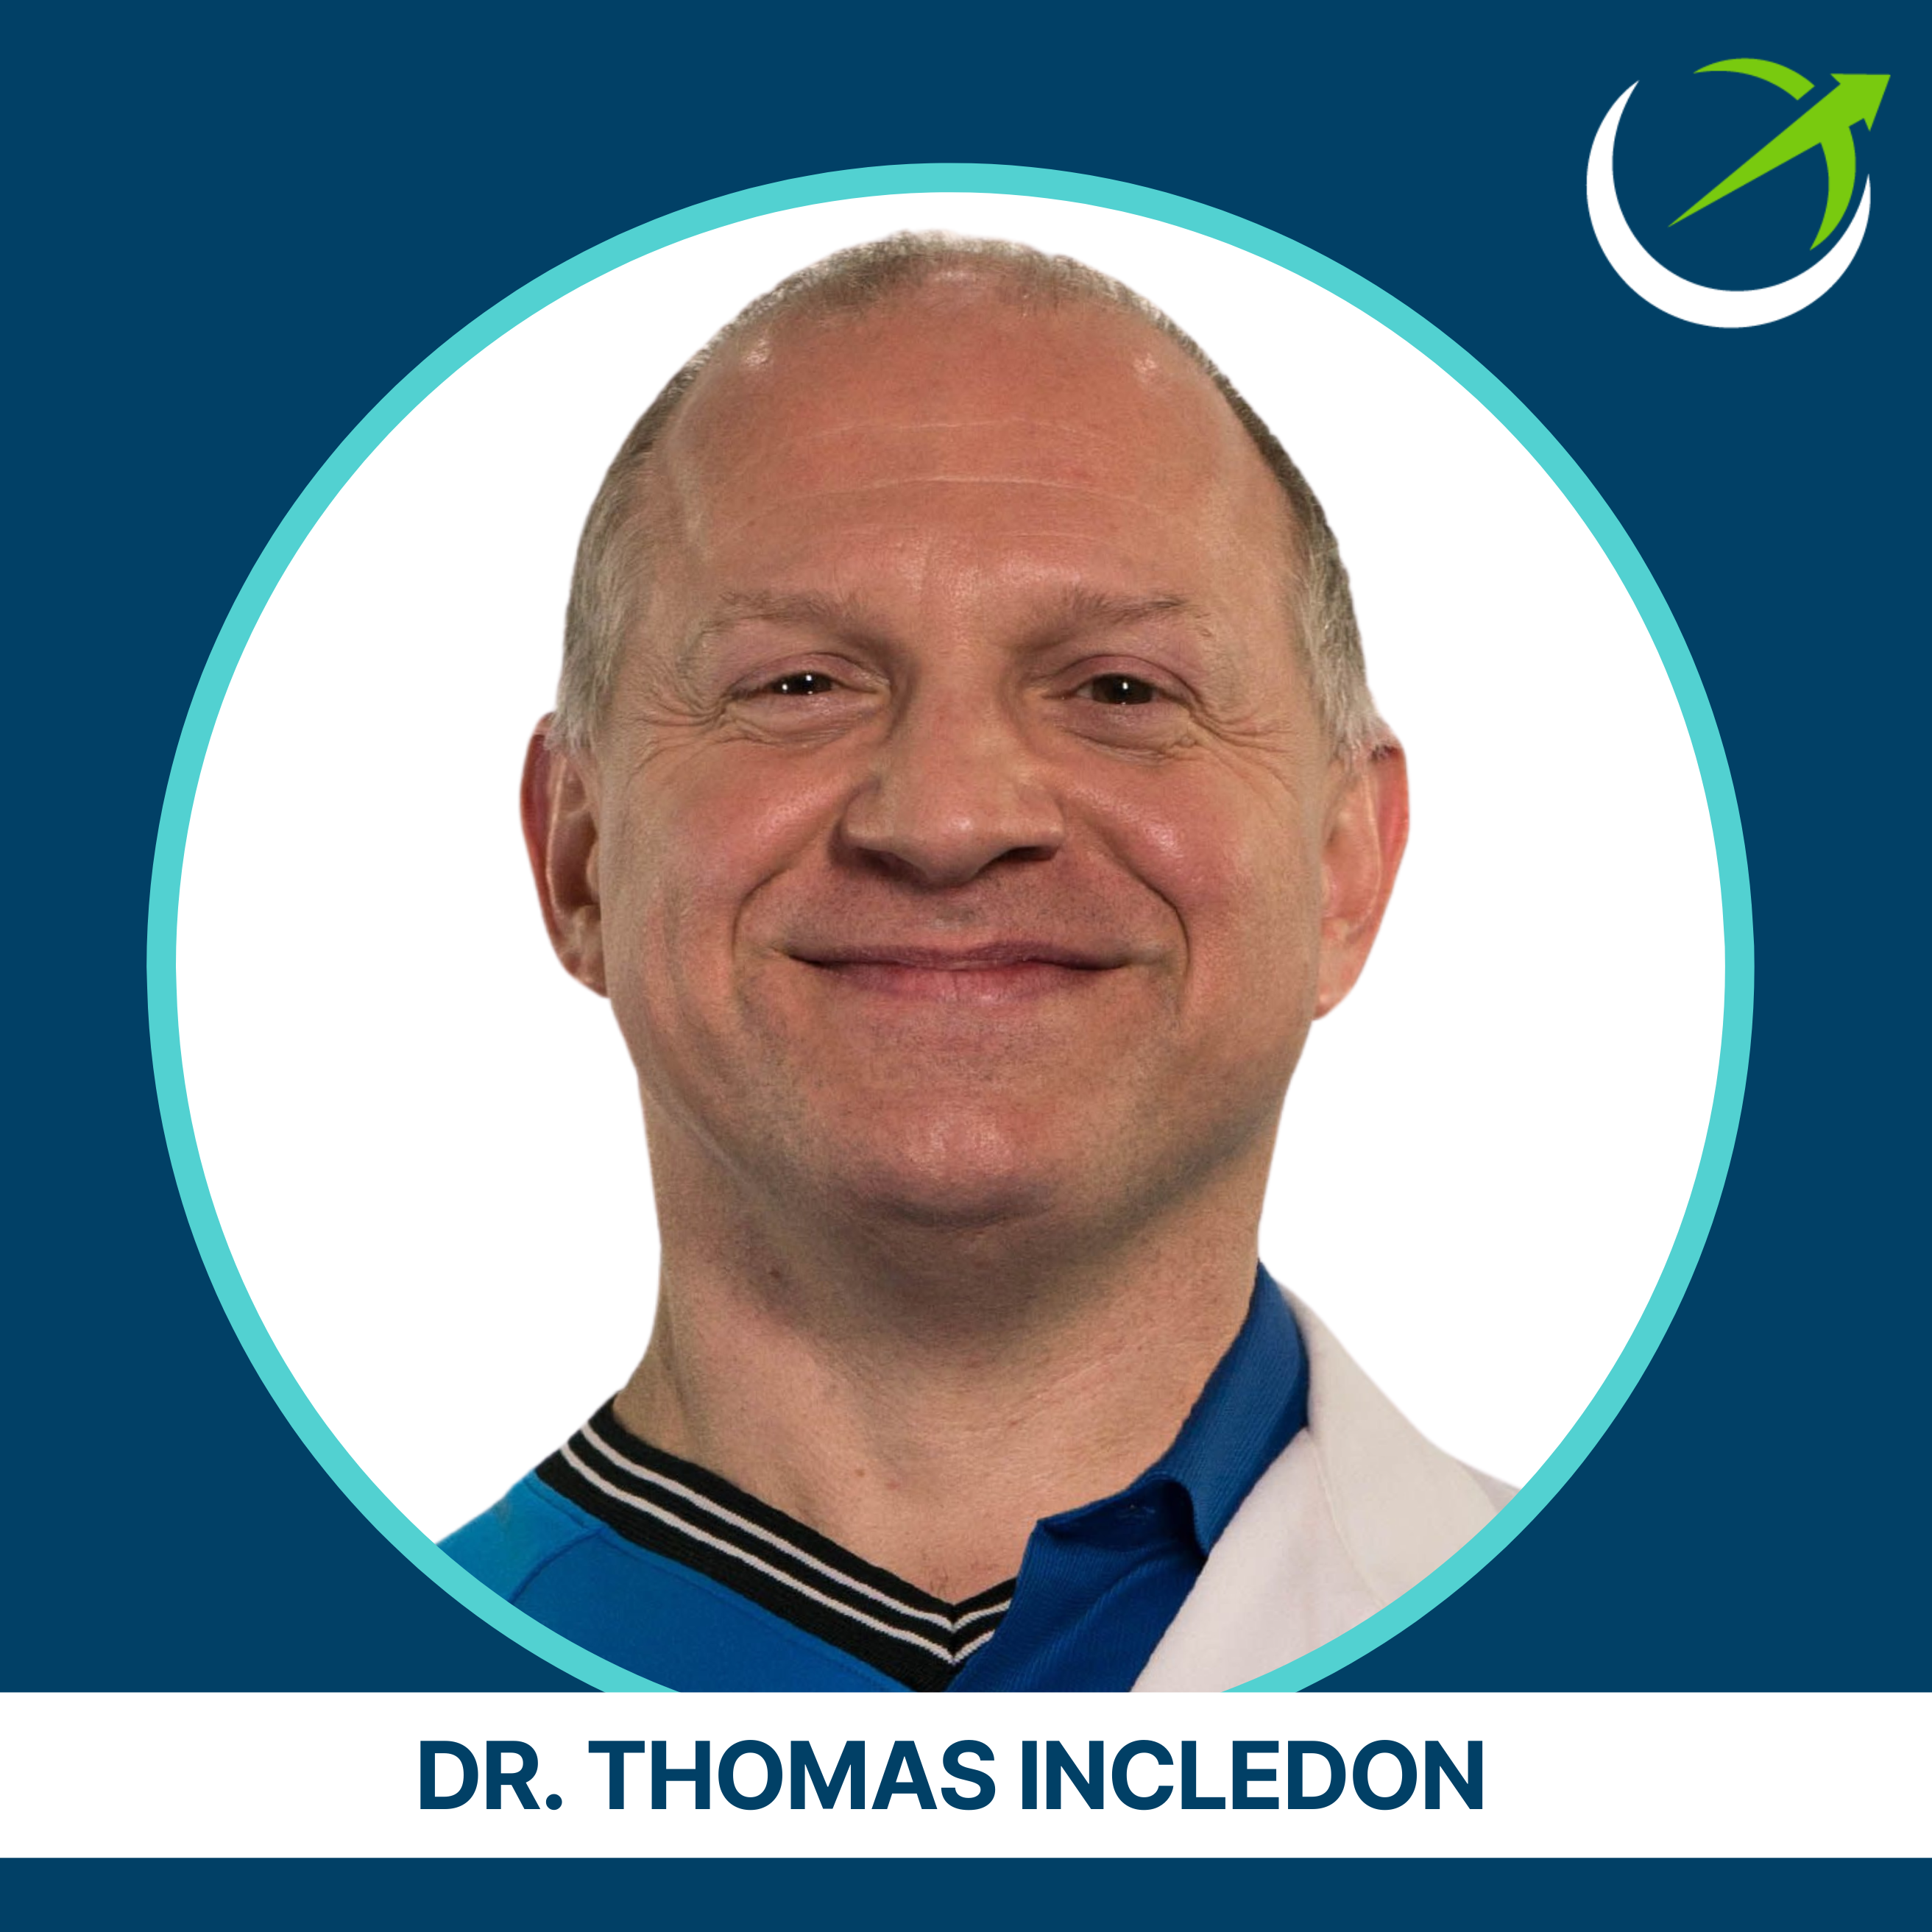 DEFY the Odds: SURPRISING Cancer Treatment BREAKTHROUGHS that Leverage Exercise & Oxygen Therapy with Dr. Thomas Incledon!